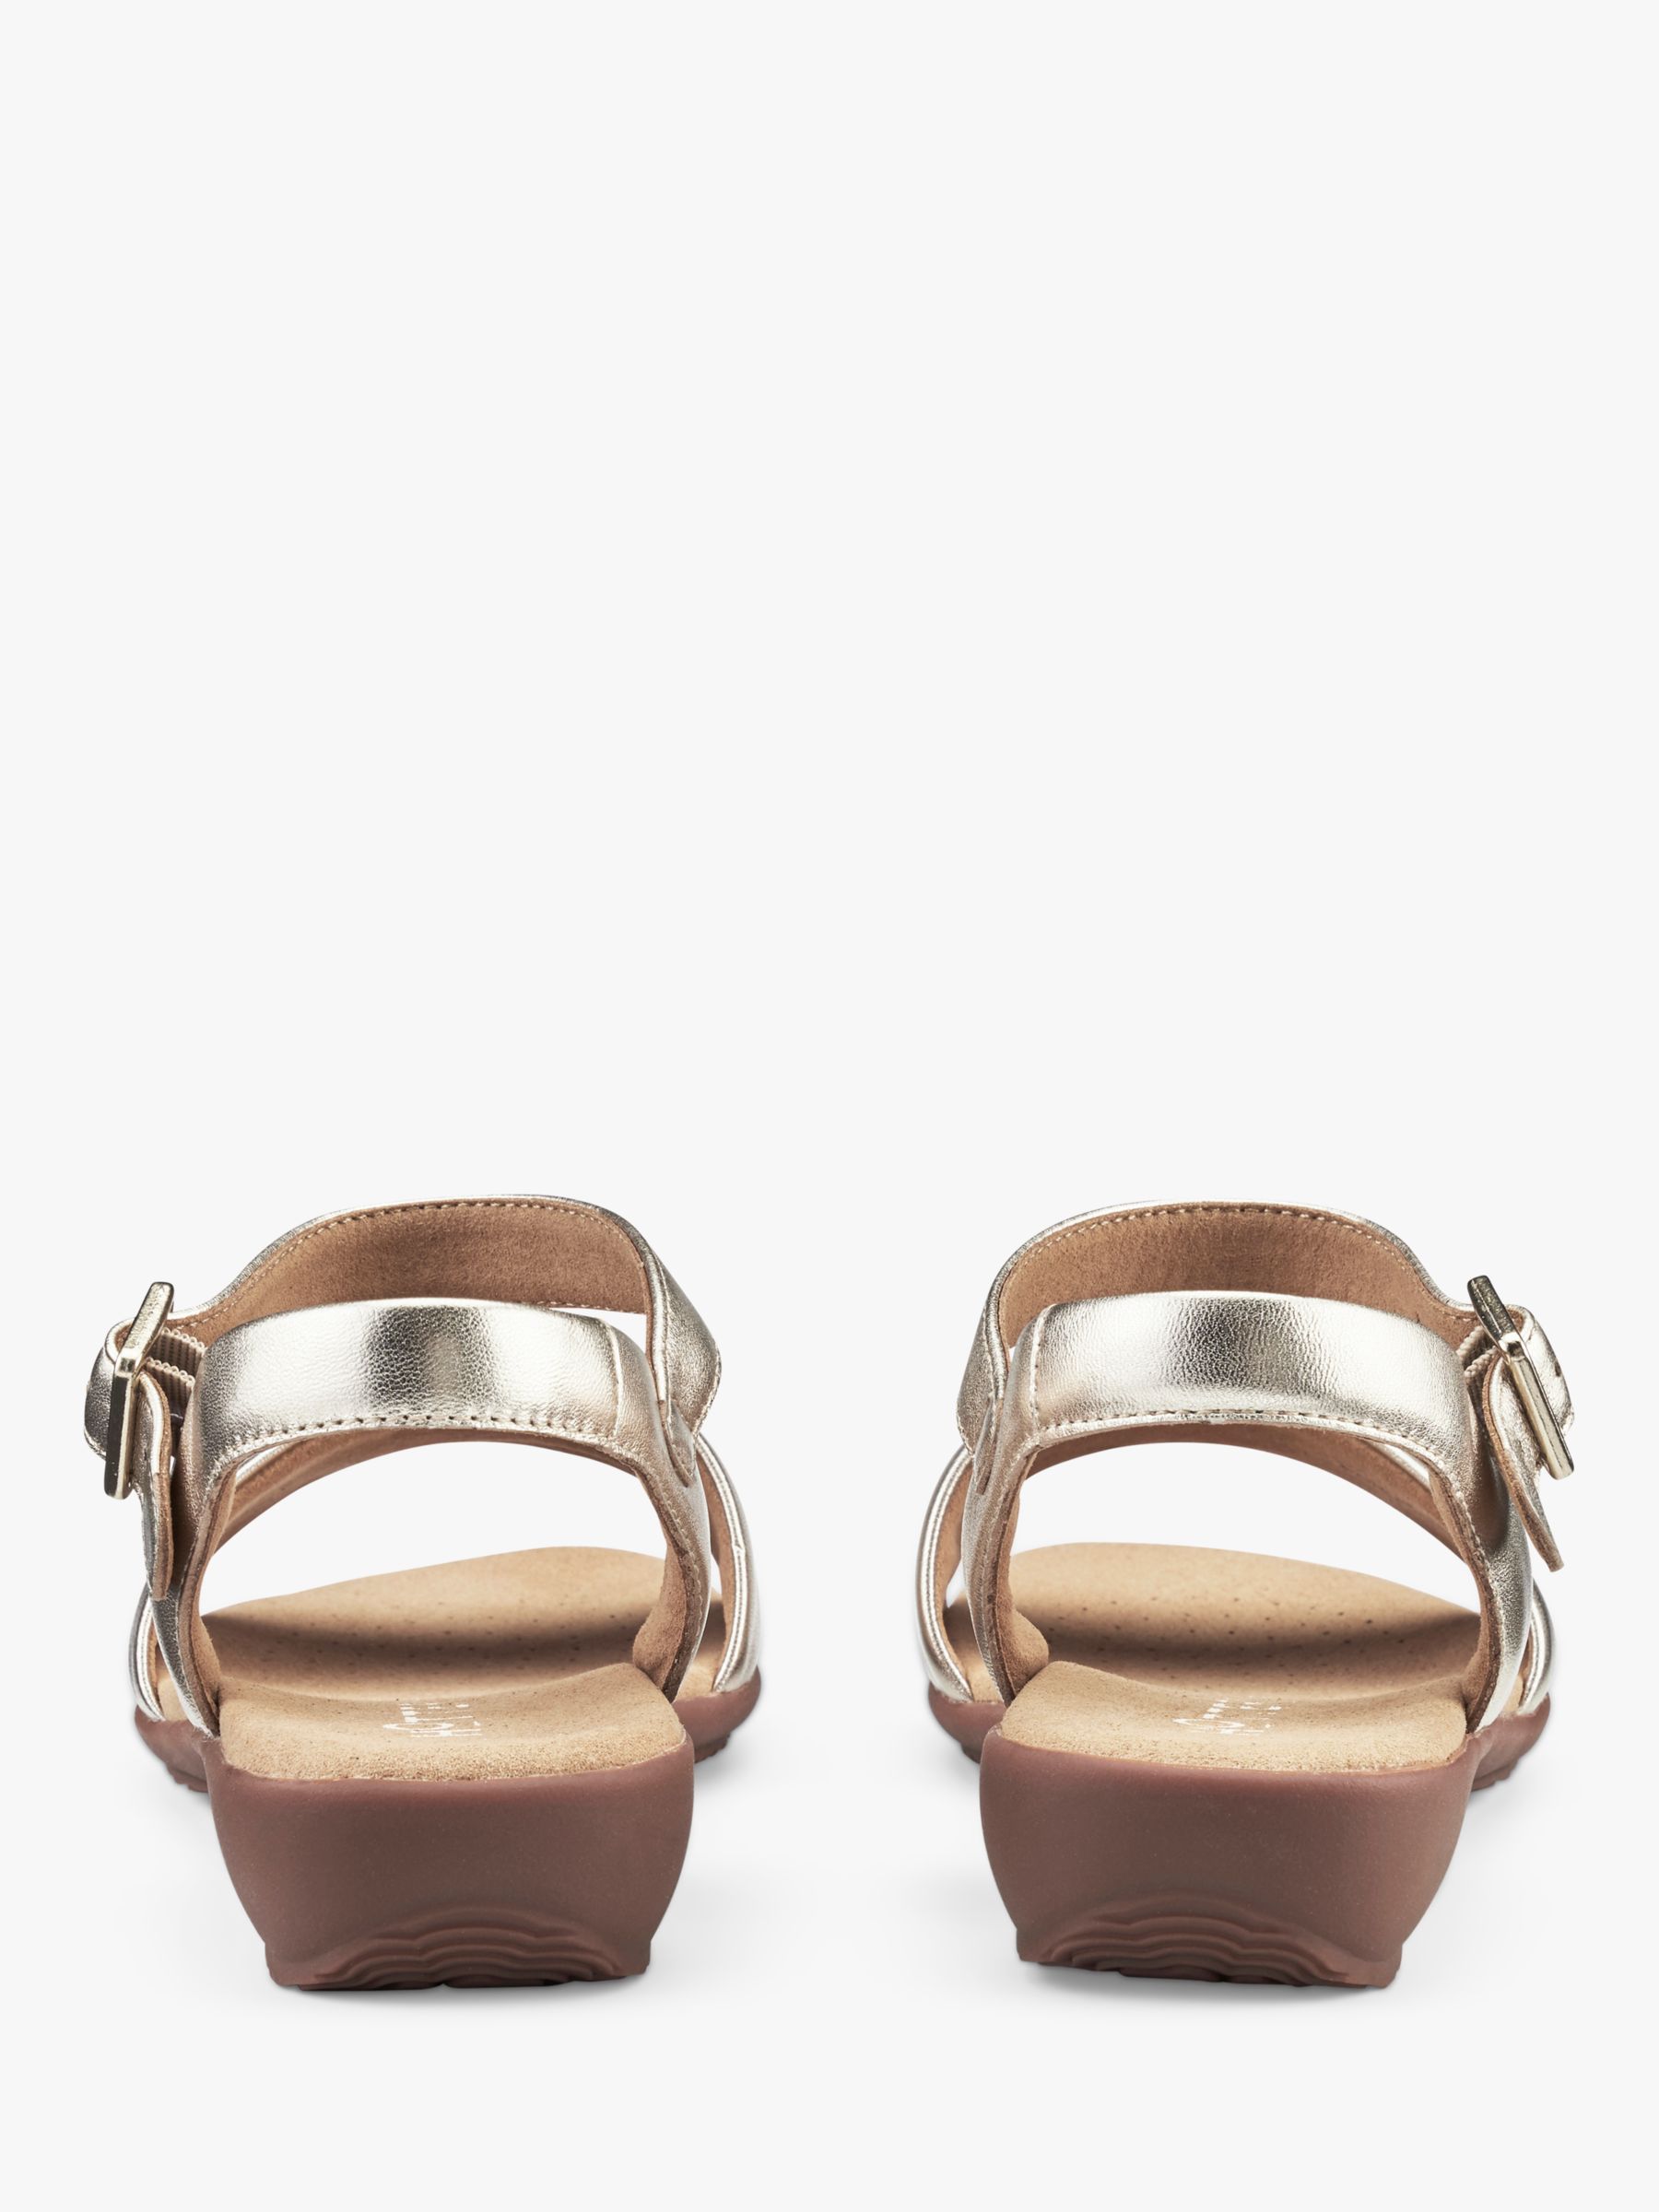 Buy Hotter Tropic Classic Leather Sandals Online at johnlewis.com